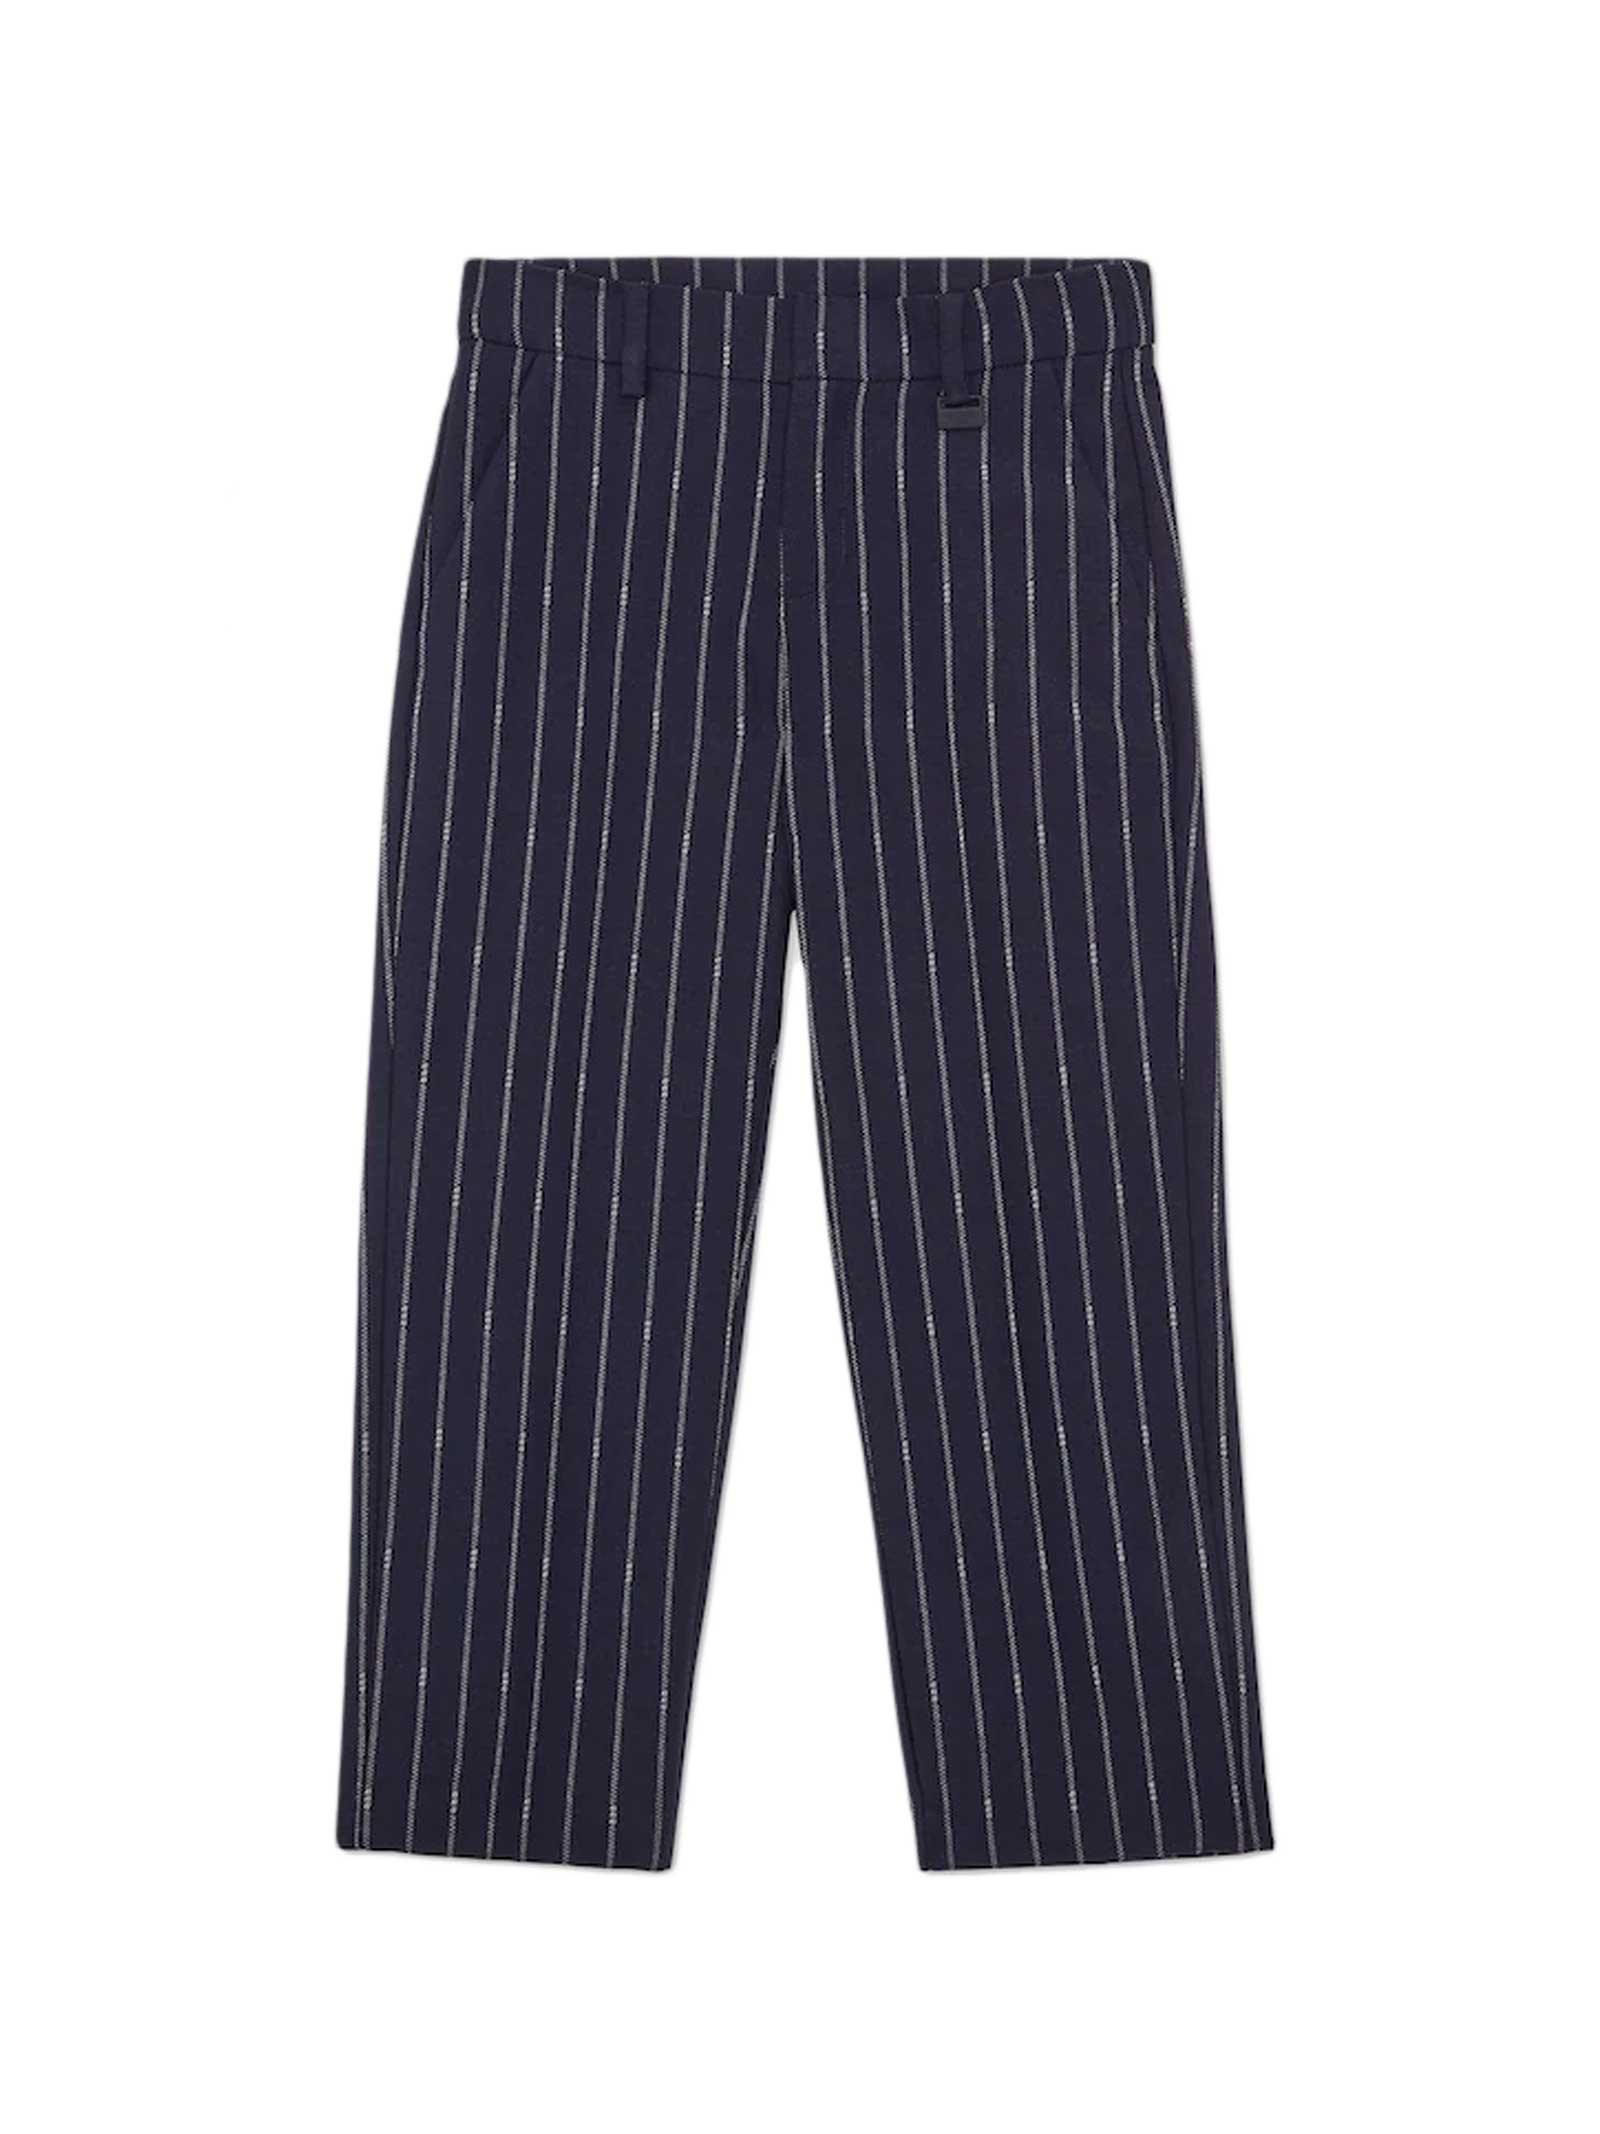 Fendi Navy Blue Wool Trousers With Striped Print